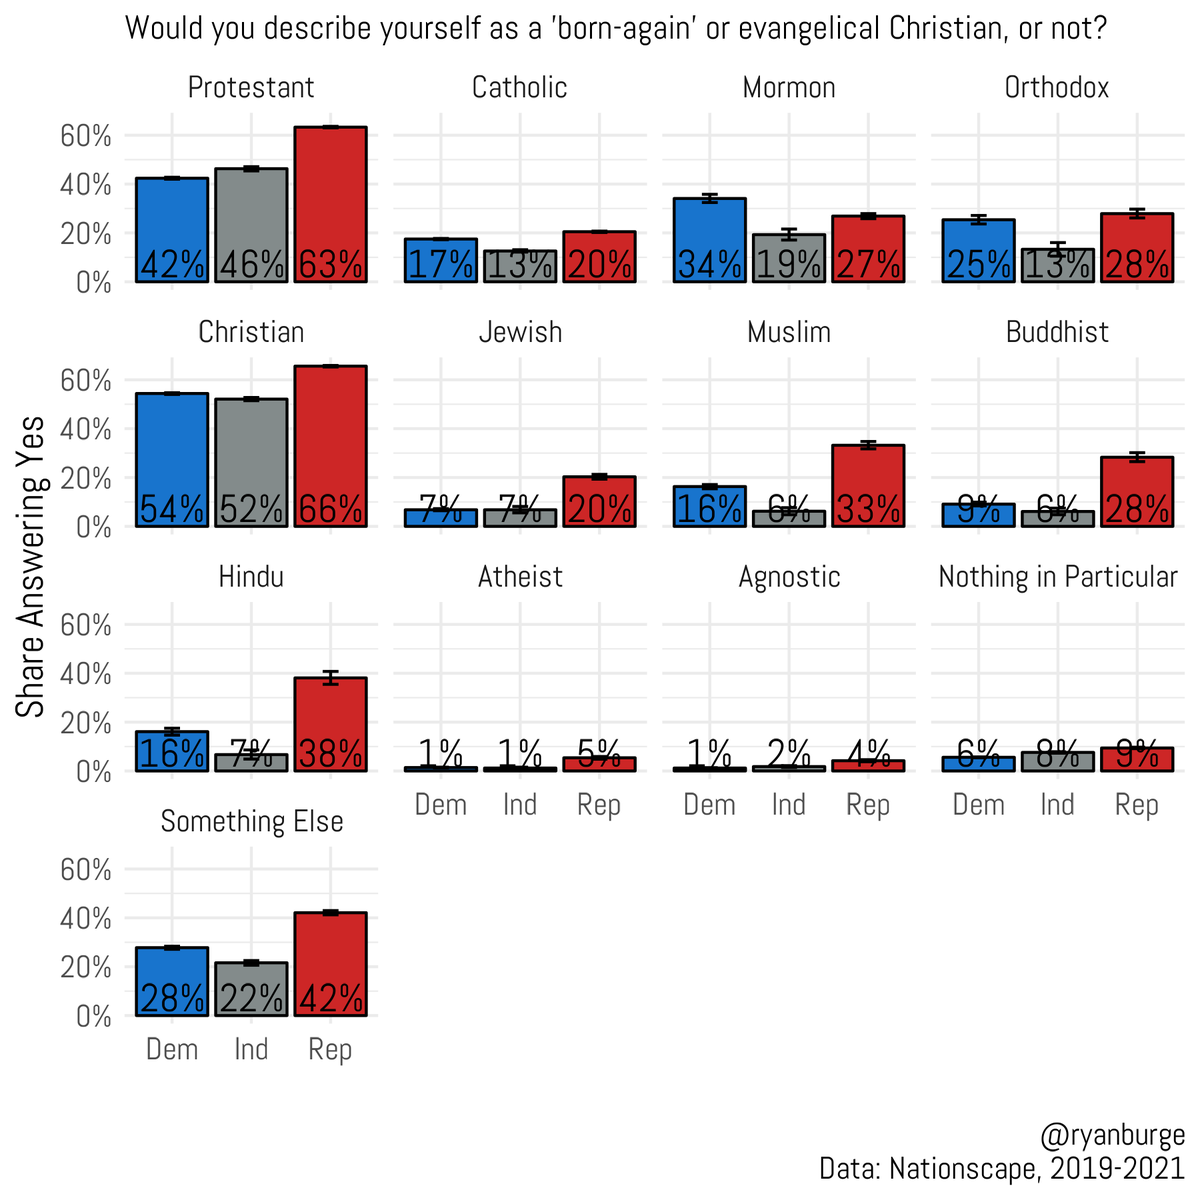 There are an increasing number of non-Christians who are describing themselves as evangelical on surveys. It could be survey error. But that's hard to believe when the data indicates that Republican non-Christians are more likely to say they are evangelicals.